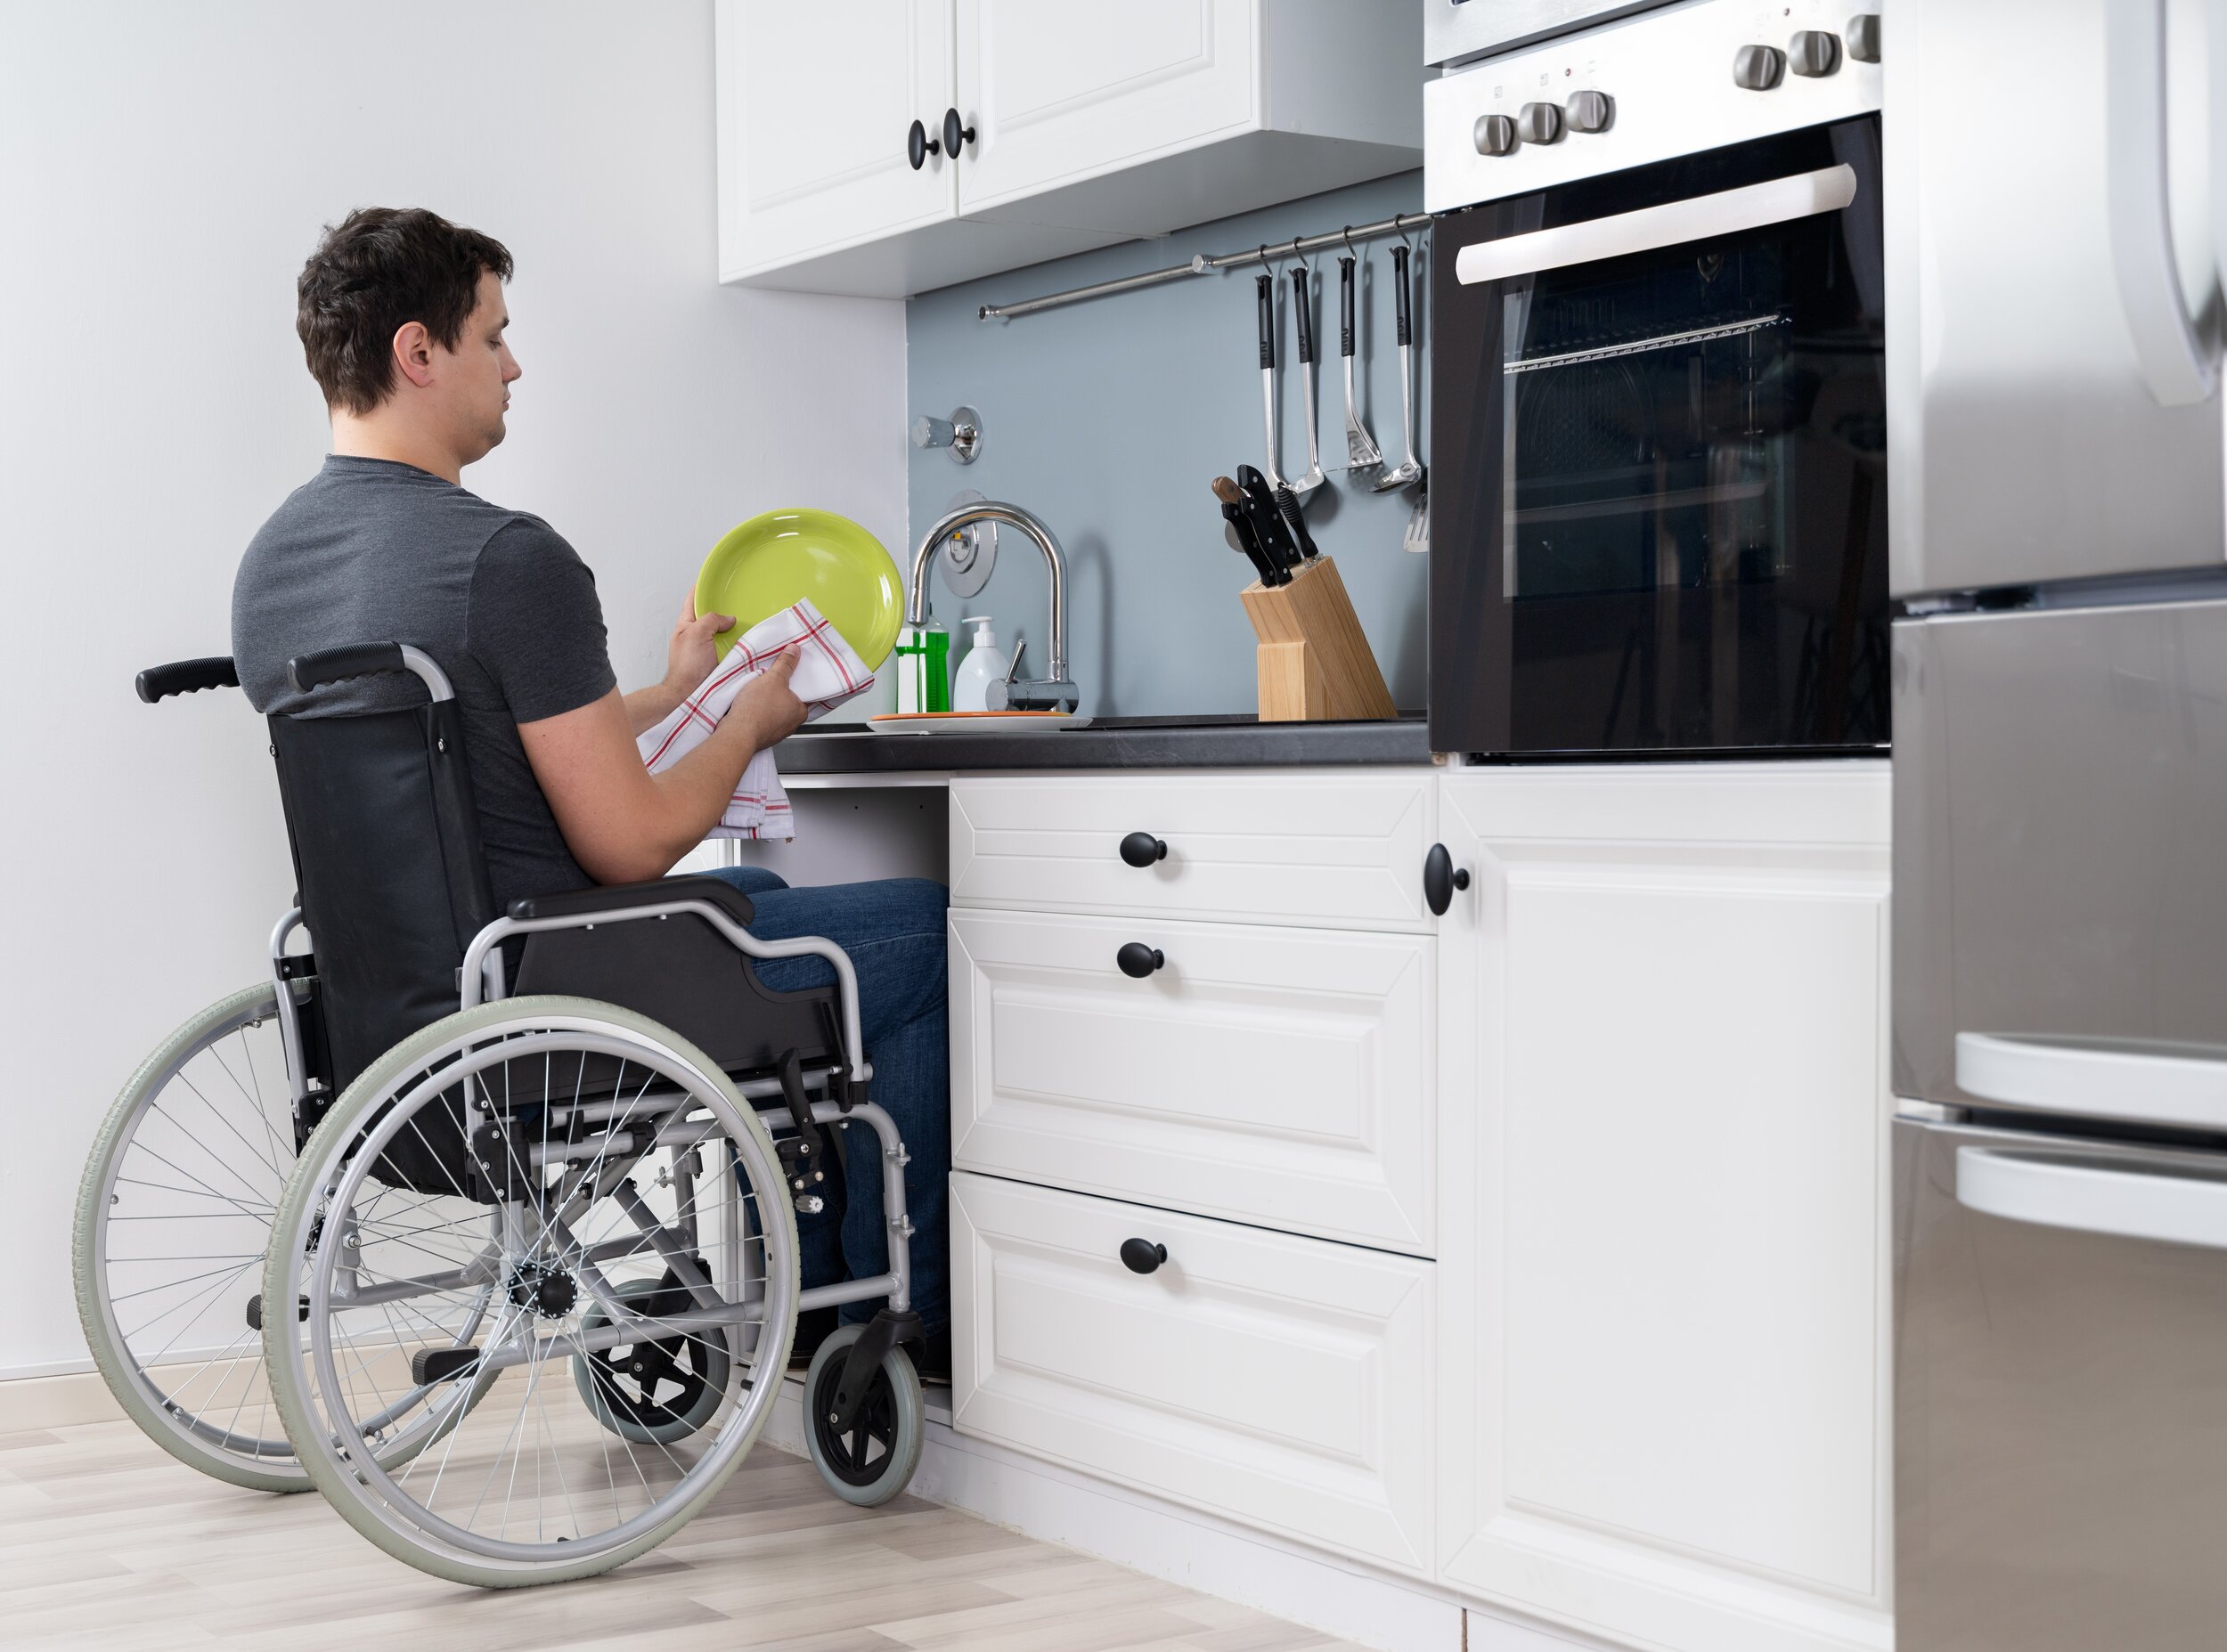 Handicapped,Man,Sitting,On,Wheelchair,Washing,And,Cleaning,Dishes,In